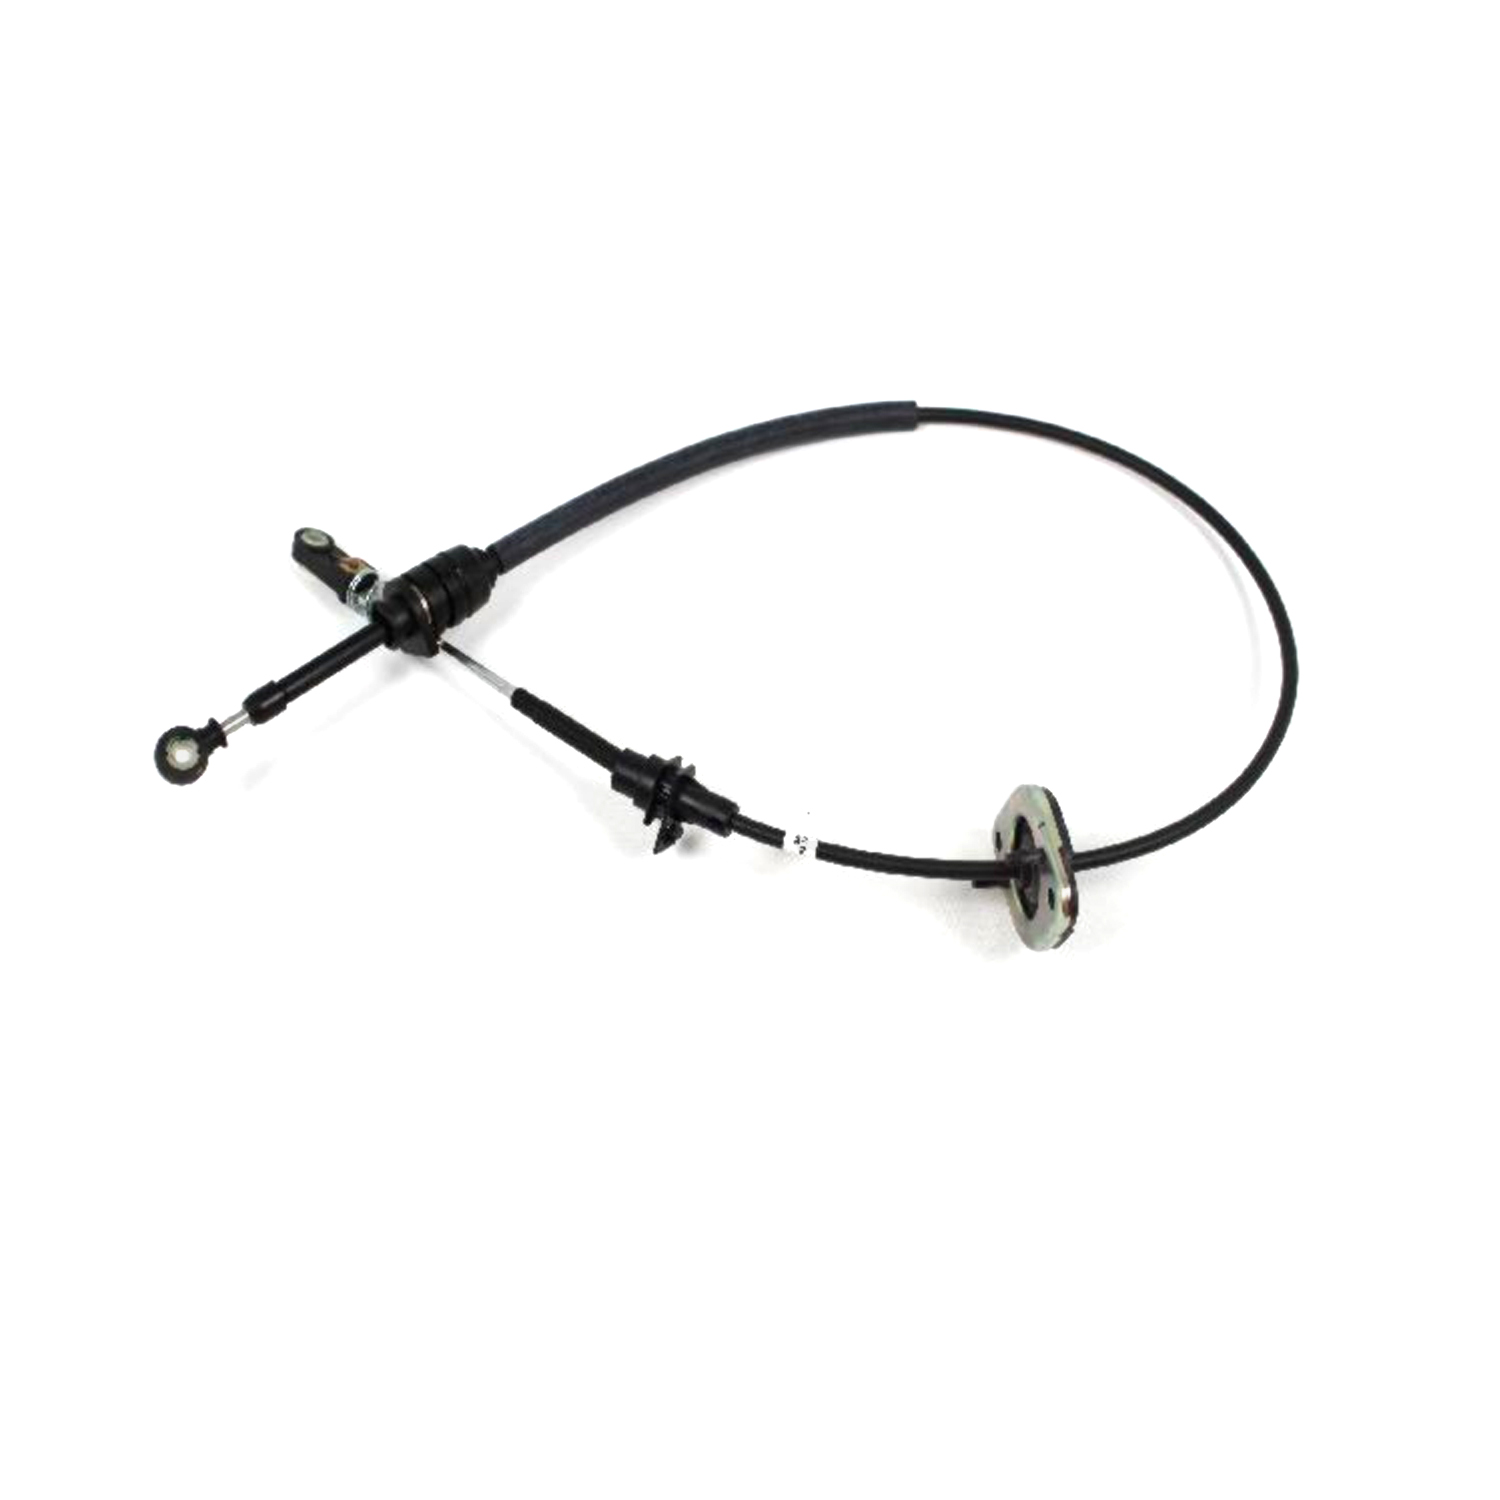 MOPAR BRAND - Automatic Transmission Shifter Cable - MPB 52060164AD